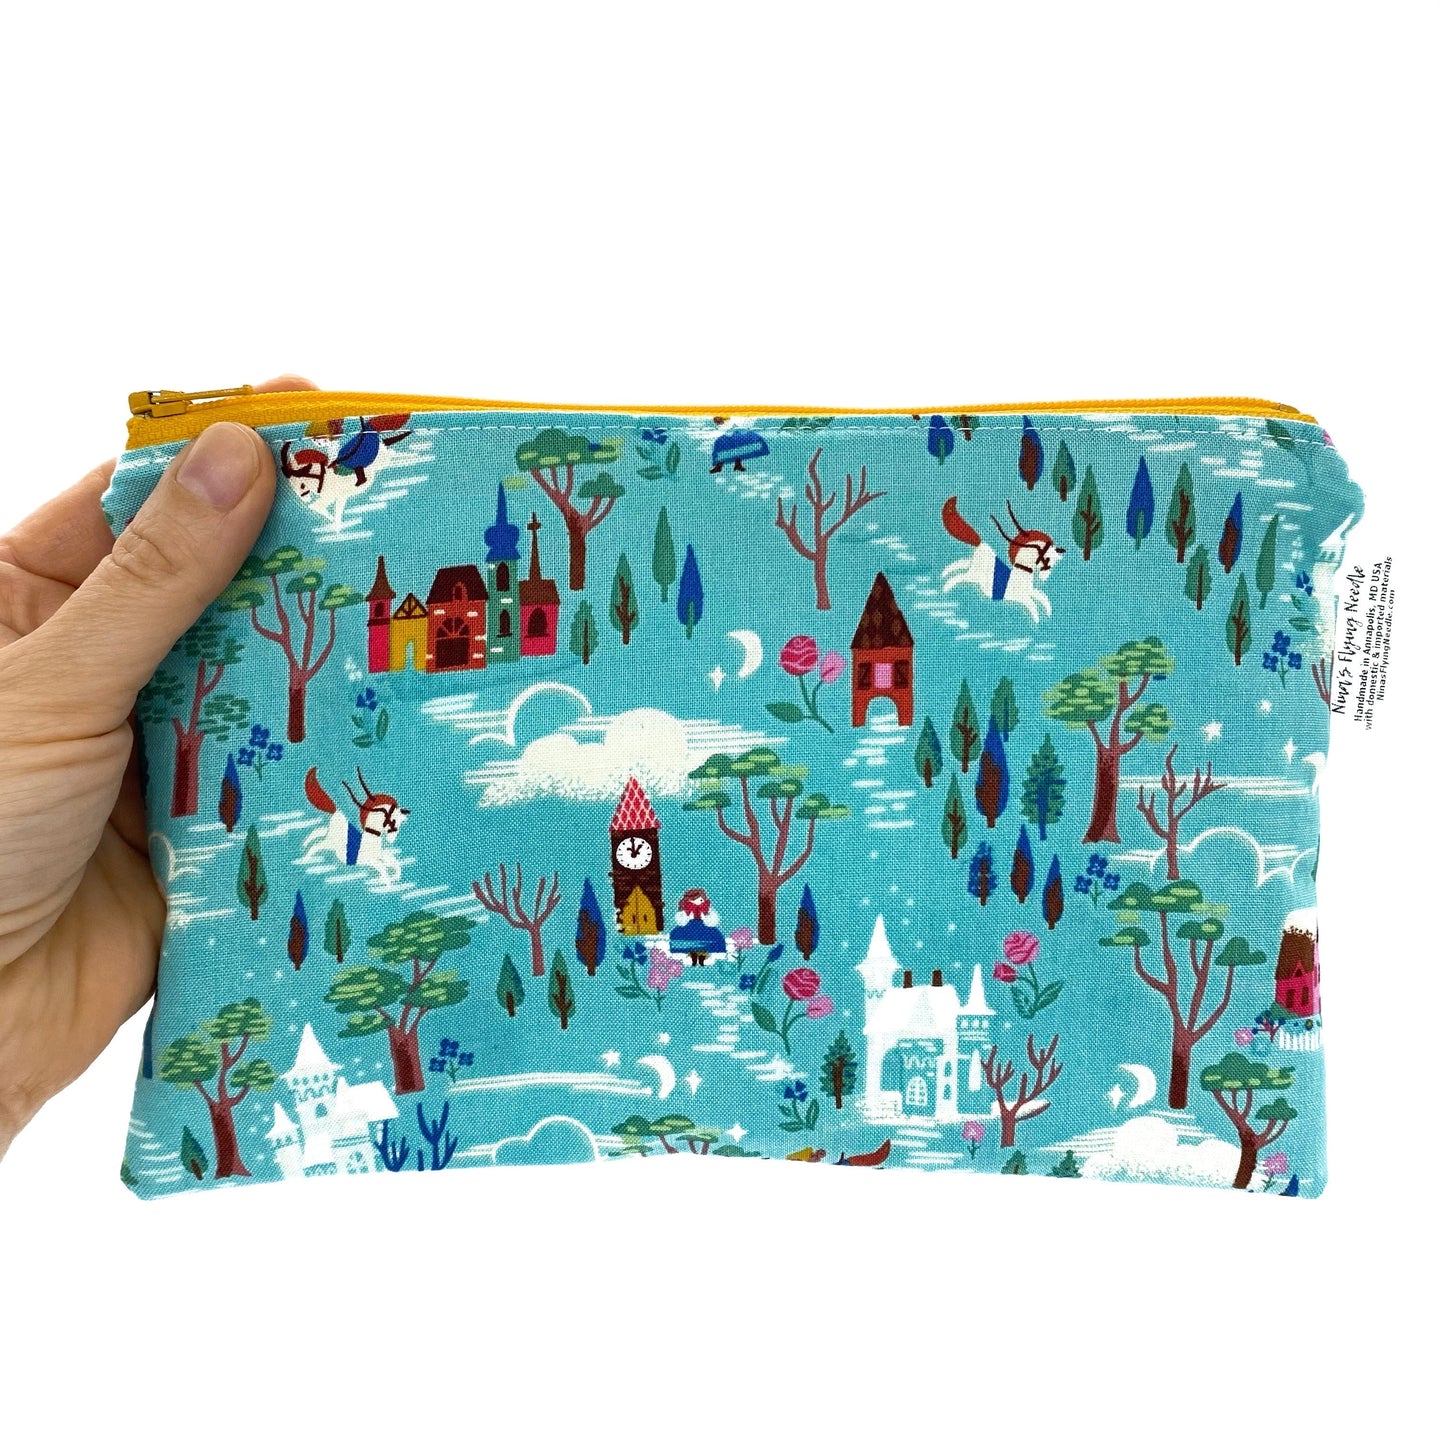 Snack Sized Reusable Zippered Bag Produce Smiling